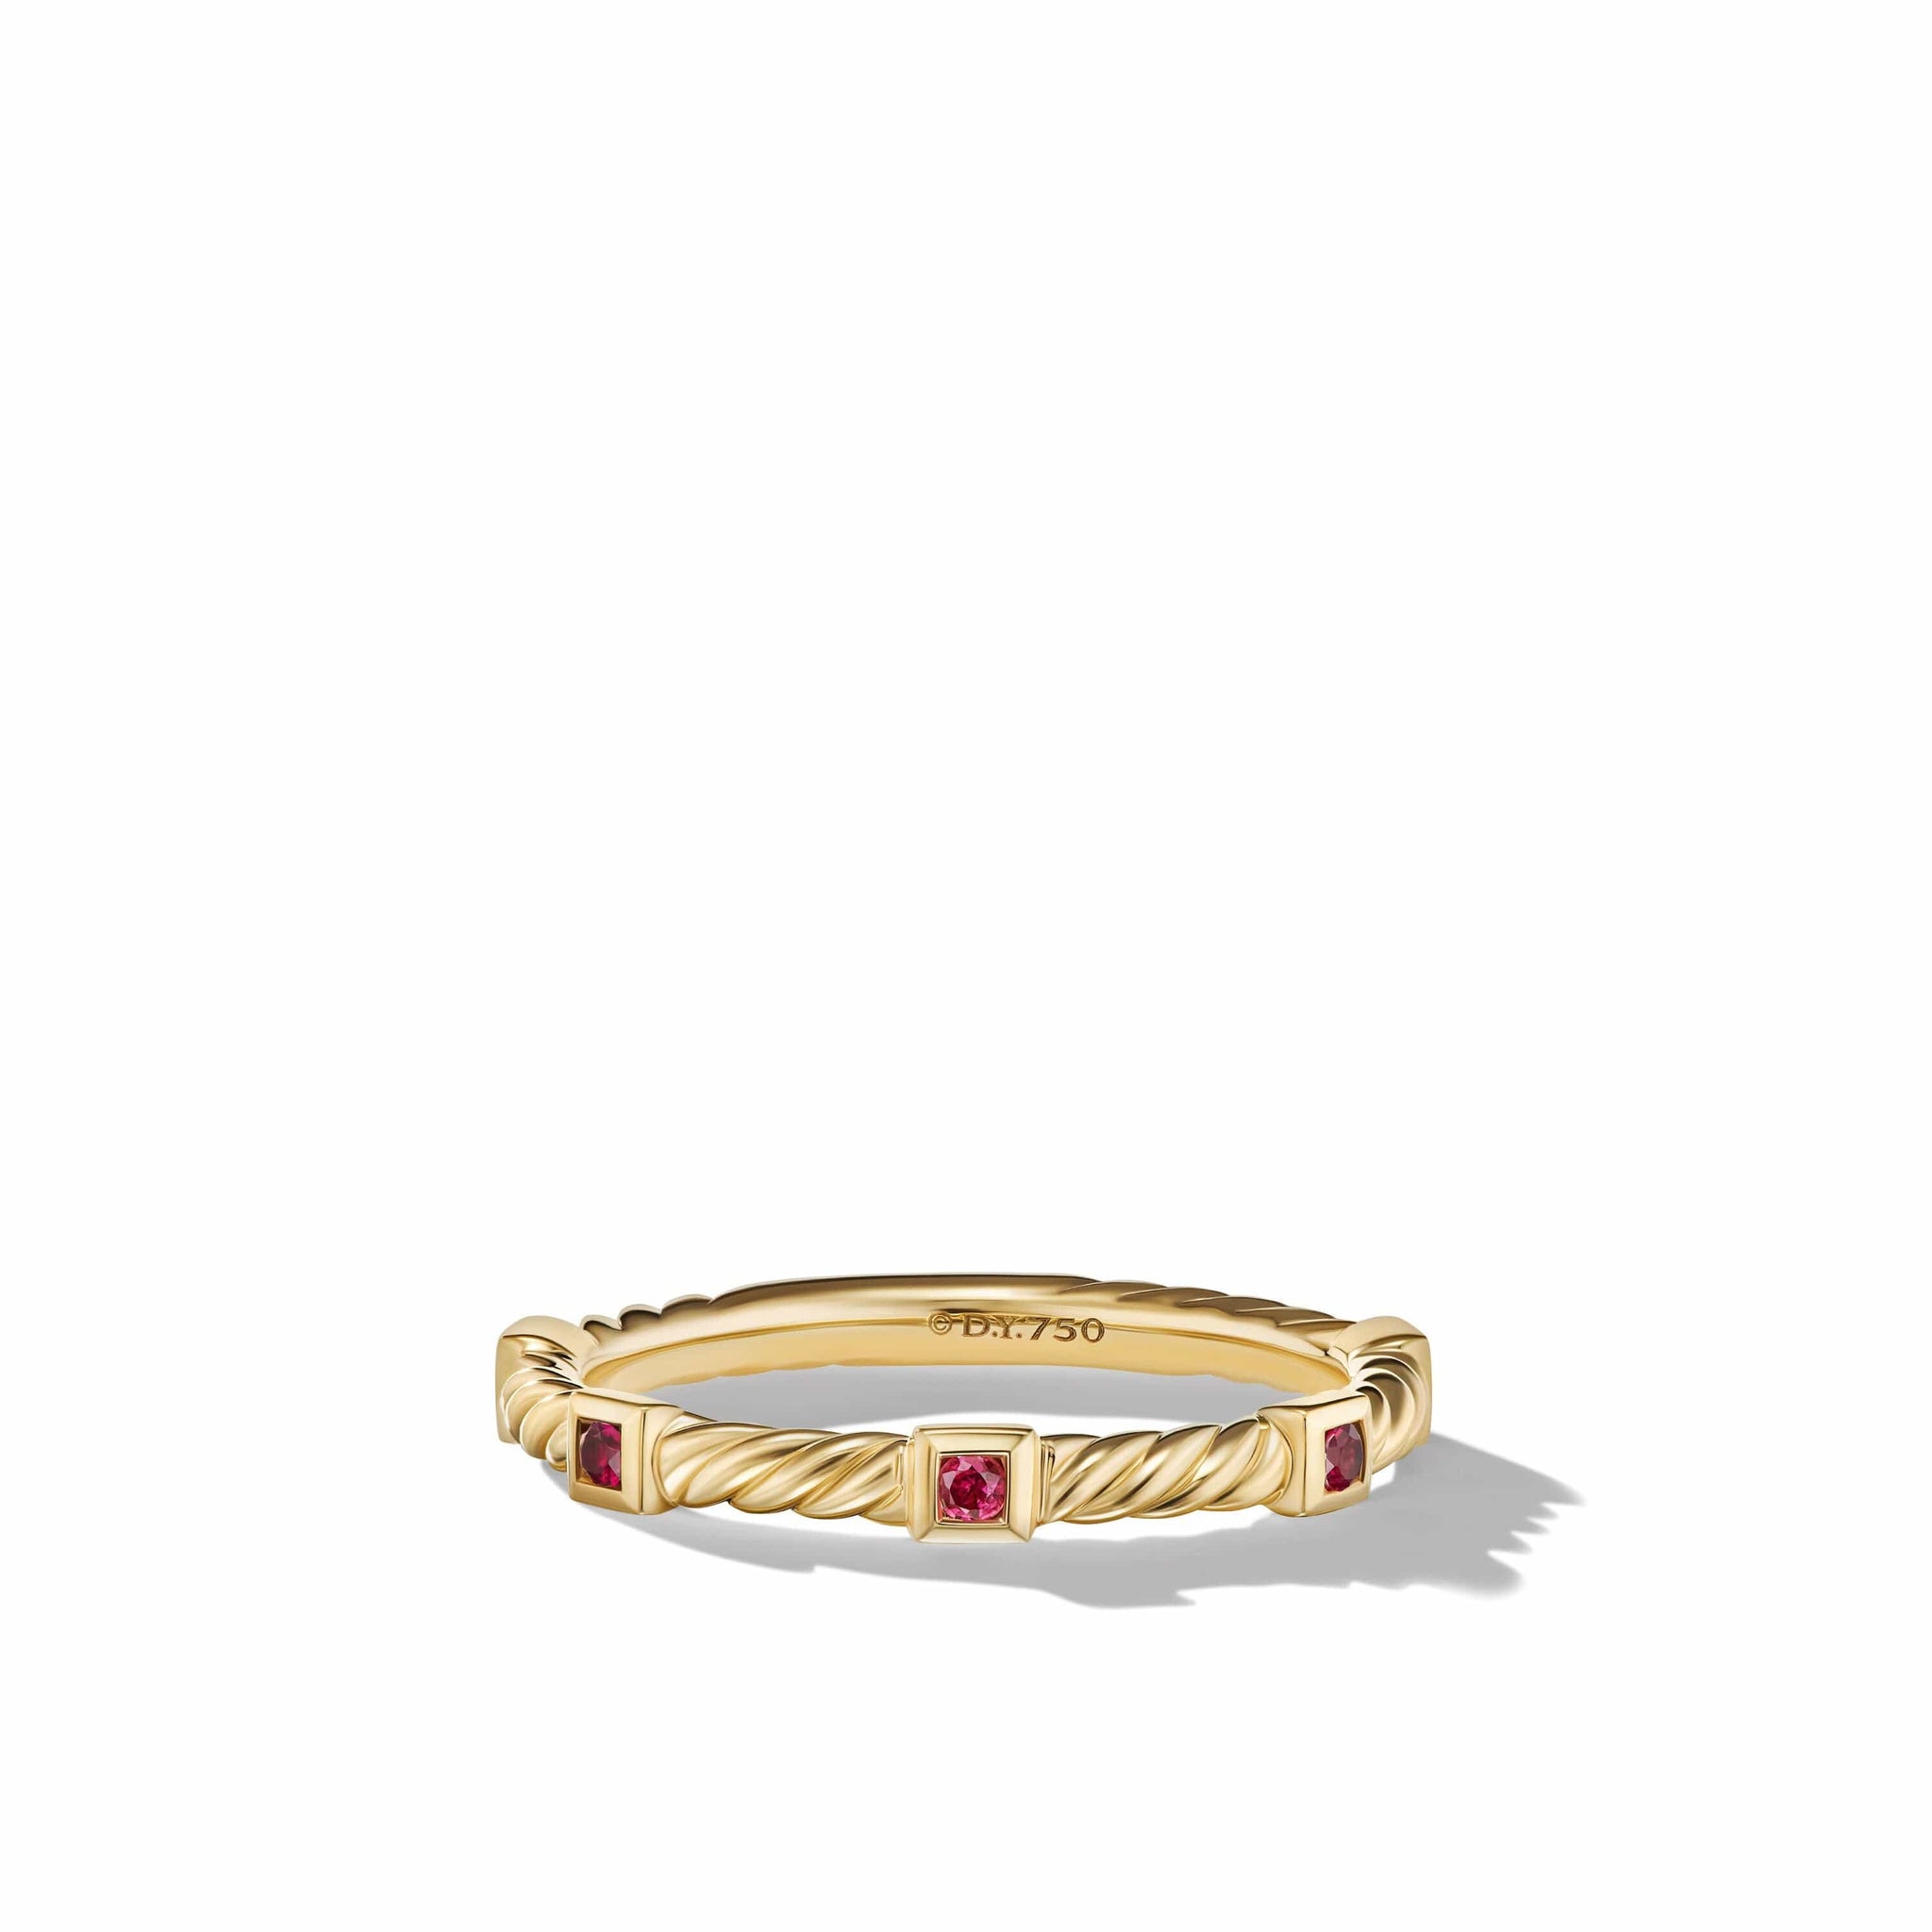 Cable Collectibles® Stack Ring in 18K Yellow Gold with Rubies